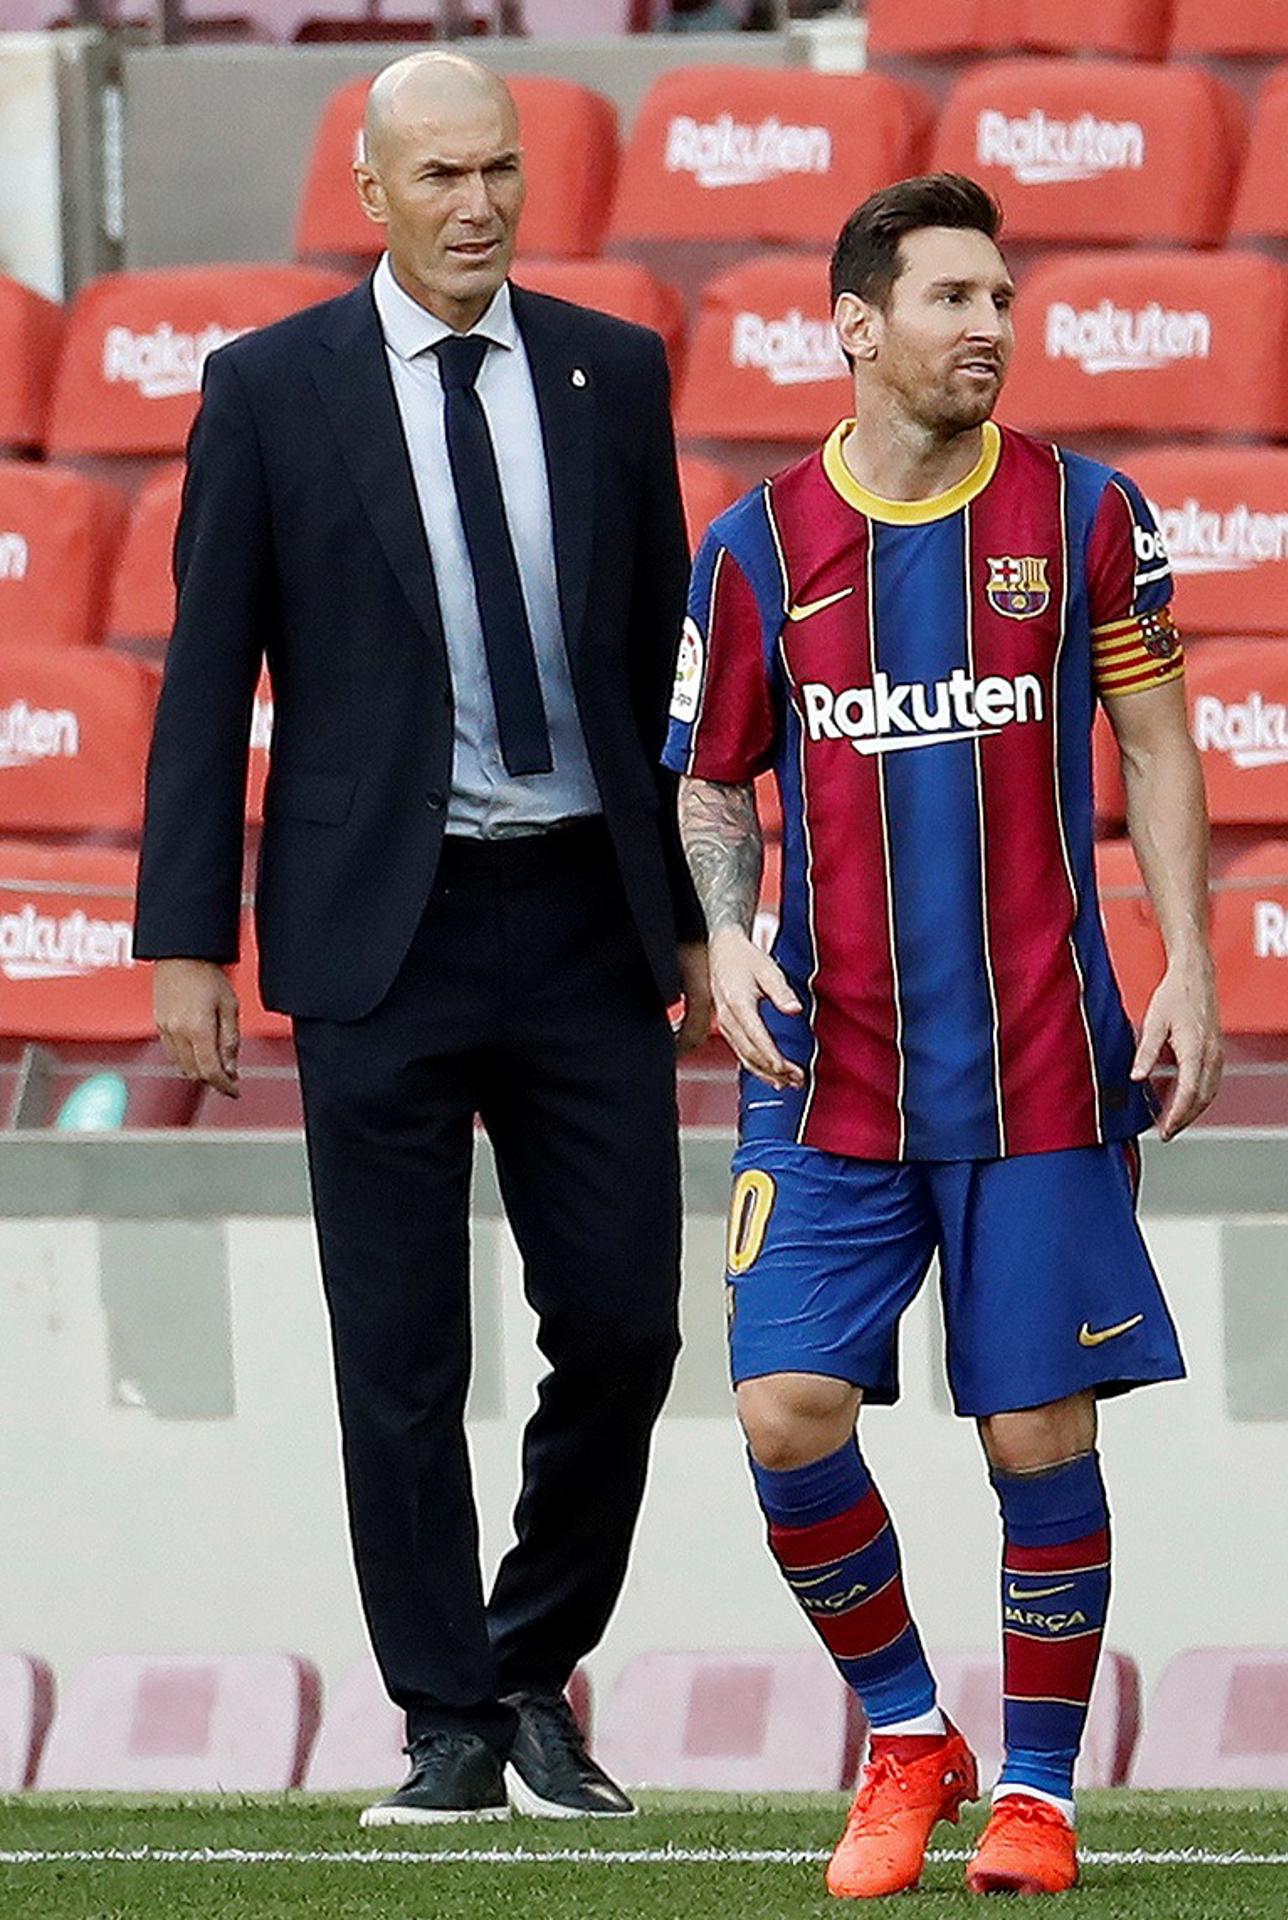 Real Madrid coach Zinedine Zidane watches FC Barcelona's Leo Messi during the La Liga match played at the Nou Camp between the two teams on 24 October, 2020. EFE-EPA FILE/Andreu Dalmau
